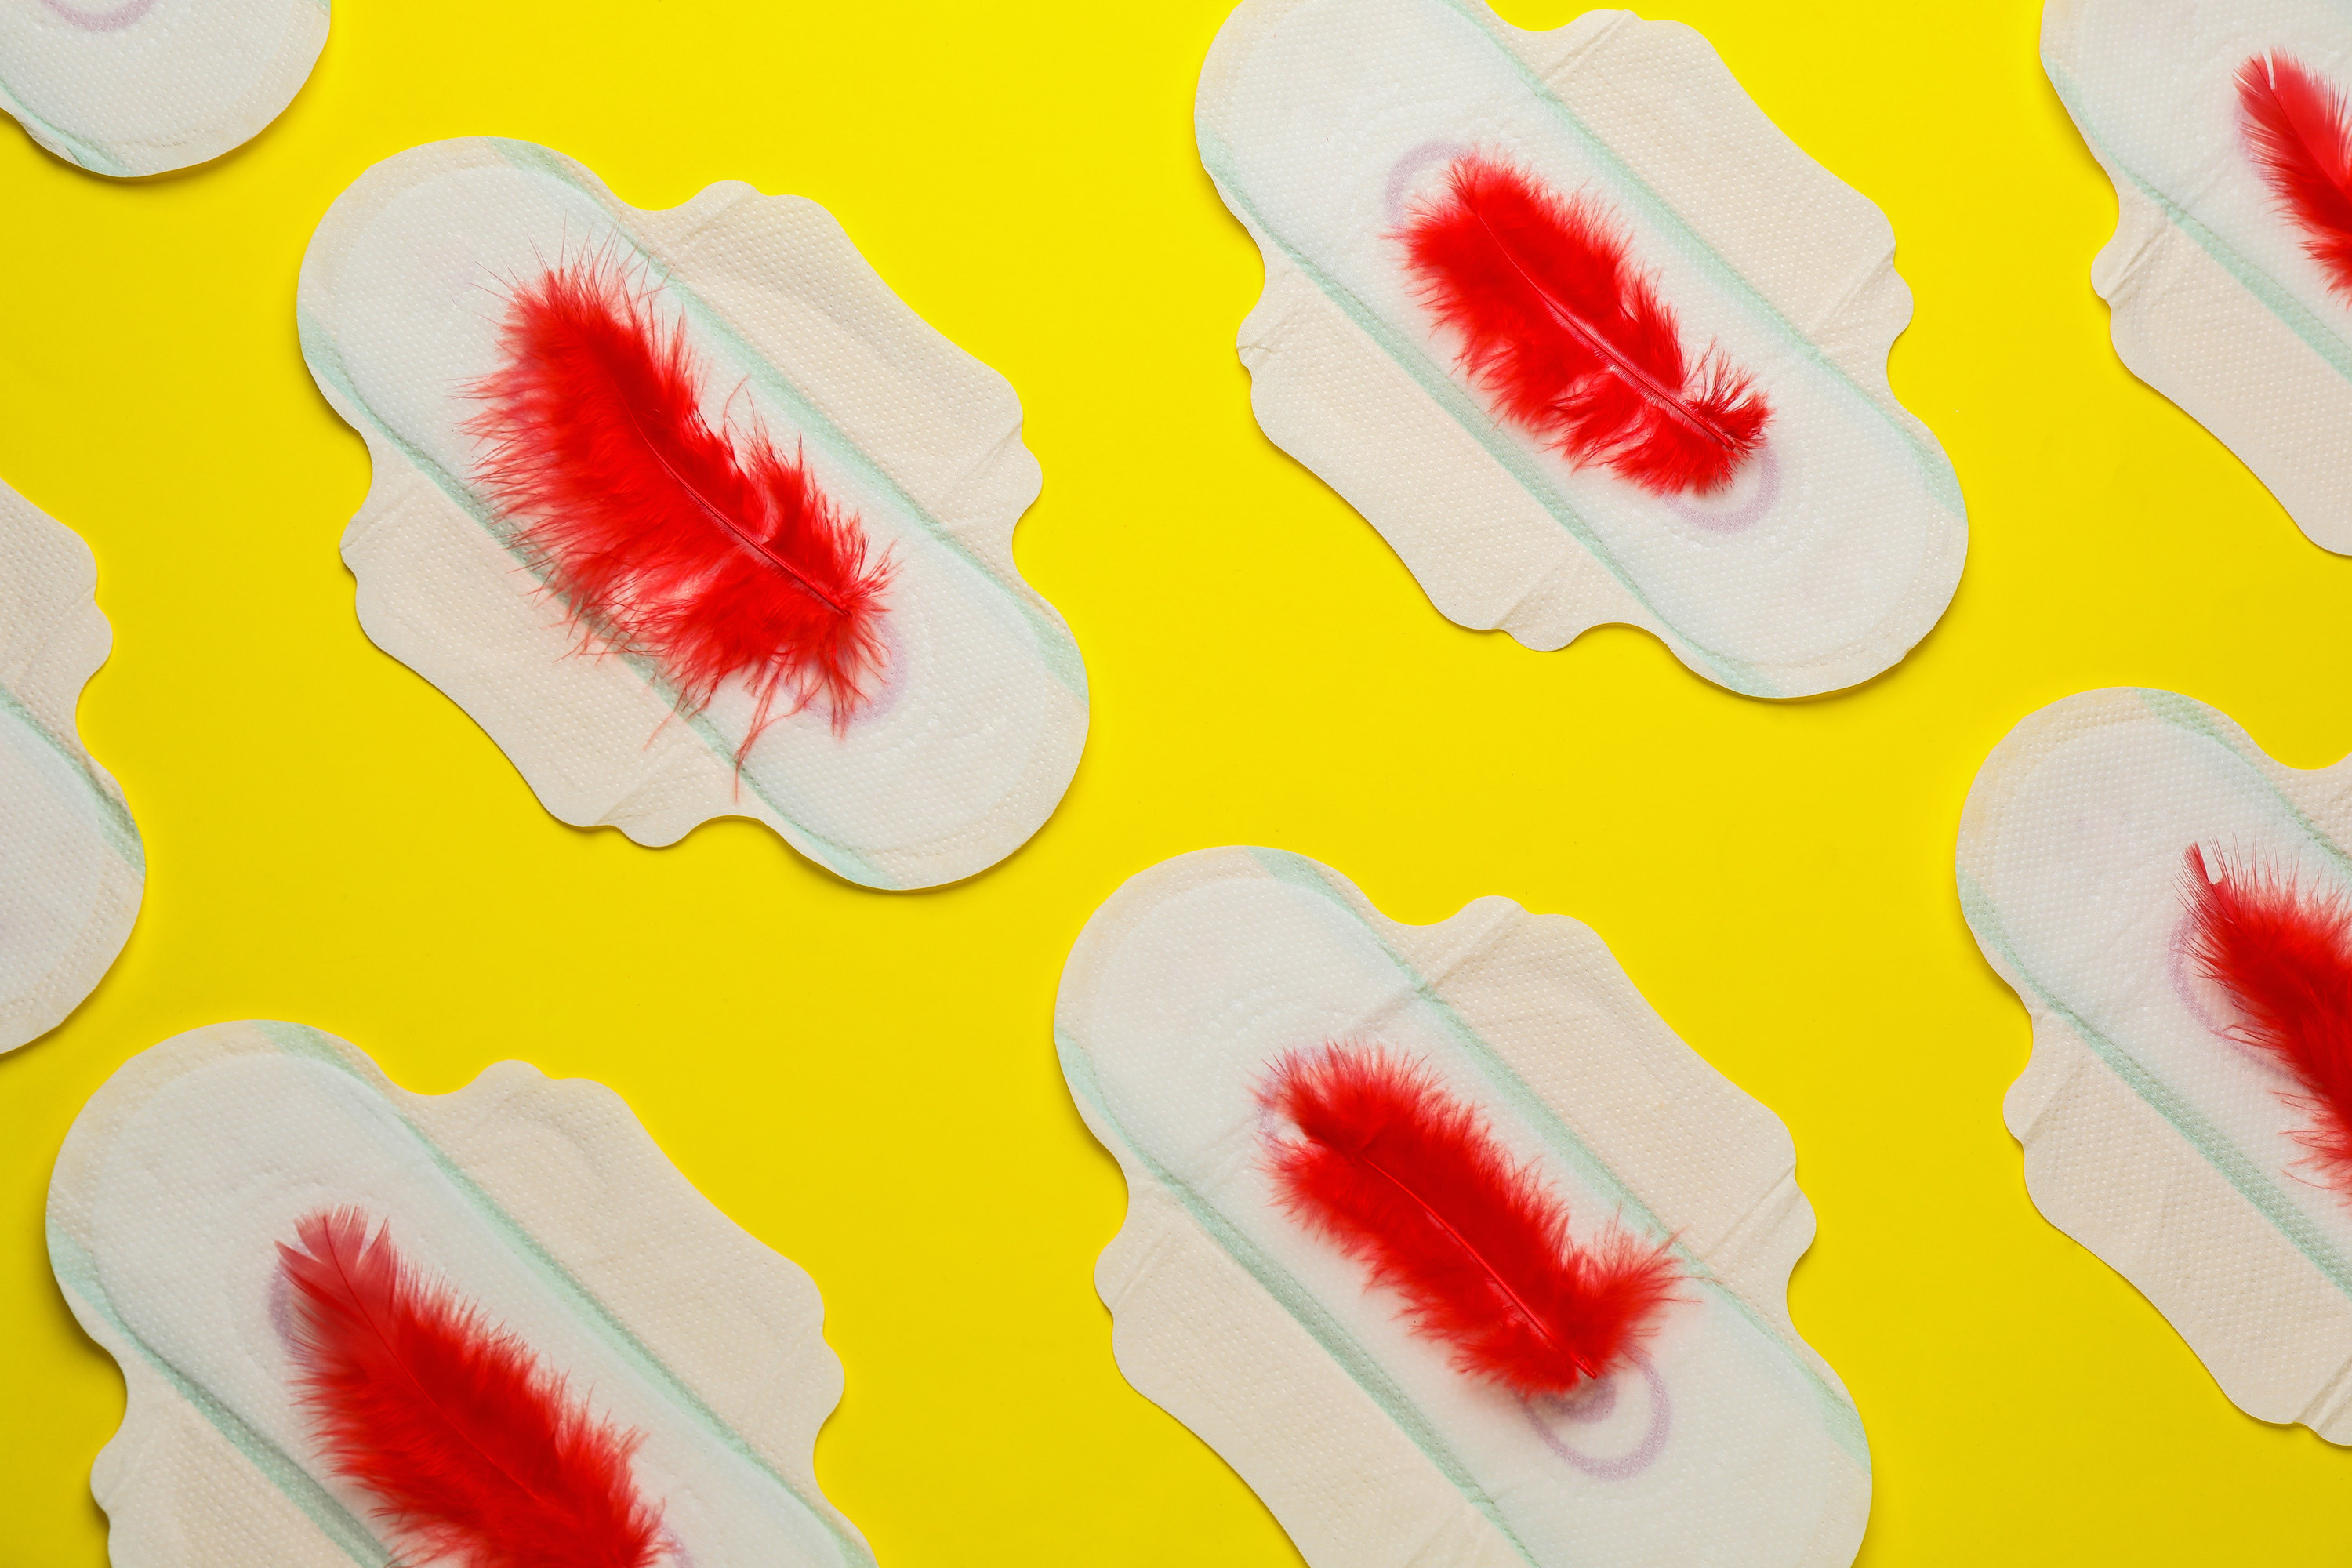 Menstrual pads with red feathers on yellow background